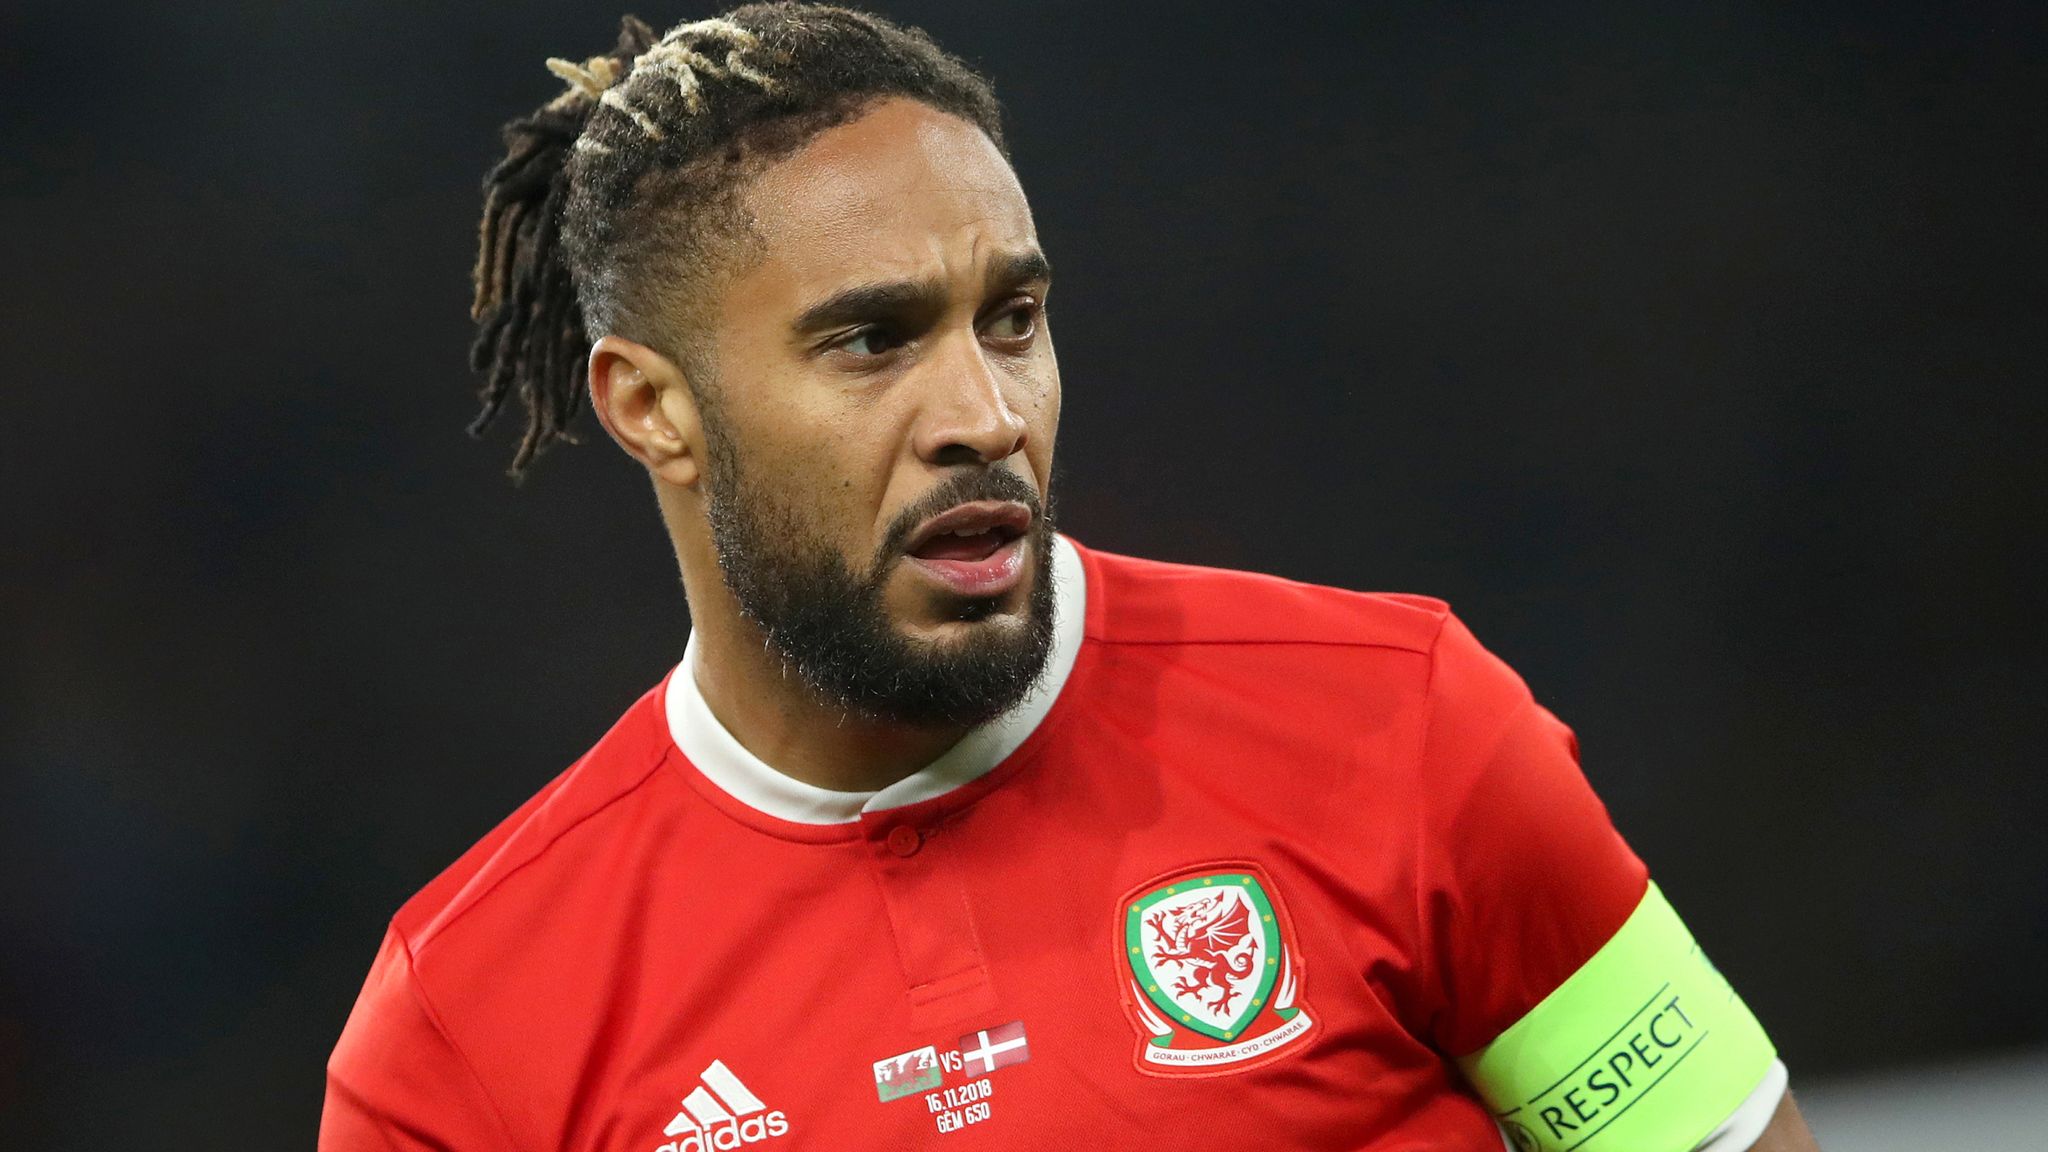  Ashley Williams, a soccer player wearing a red jersey with the number 6 on it, has fallen to the ground during a match and is lying on his back with his eyes closed.